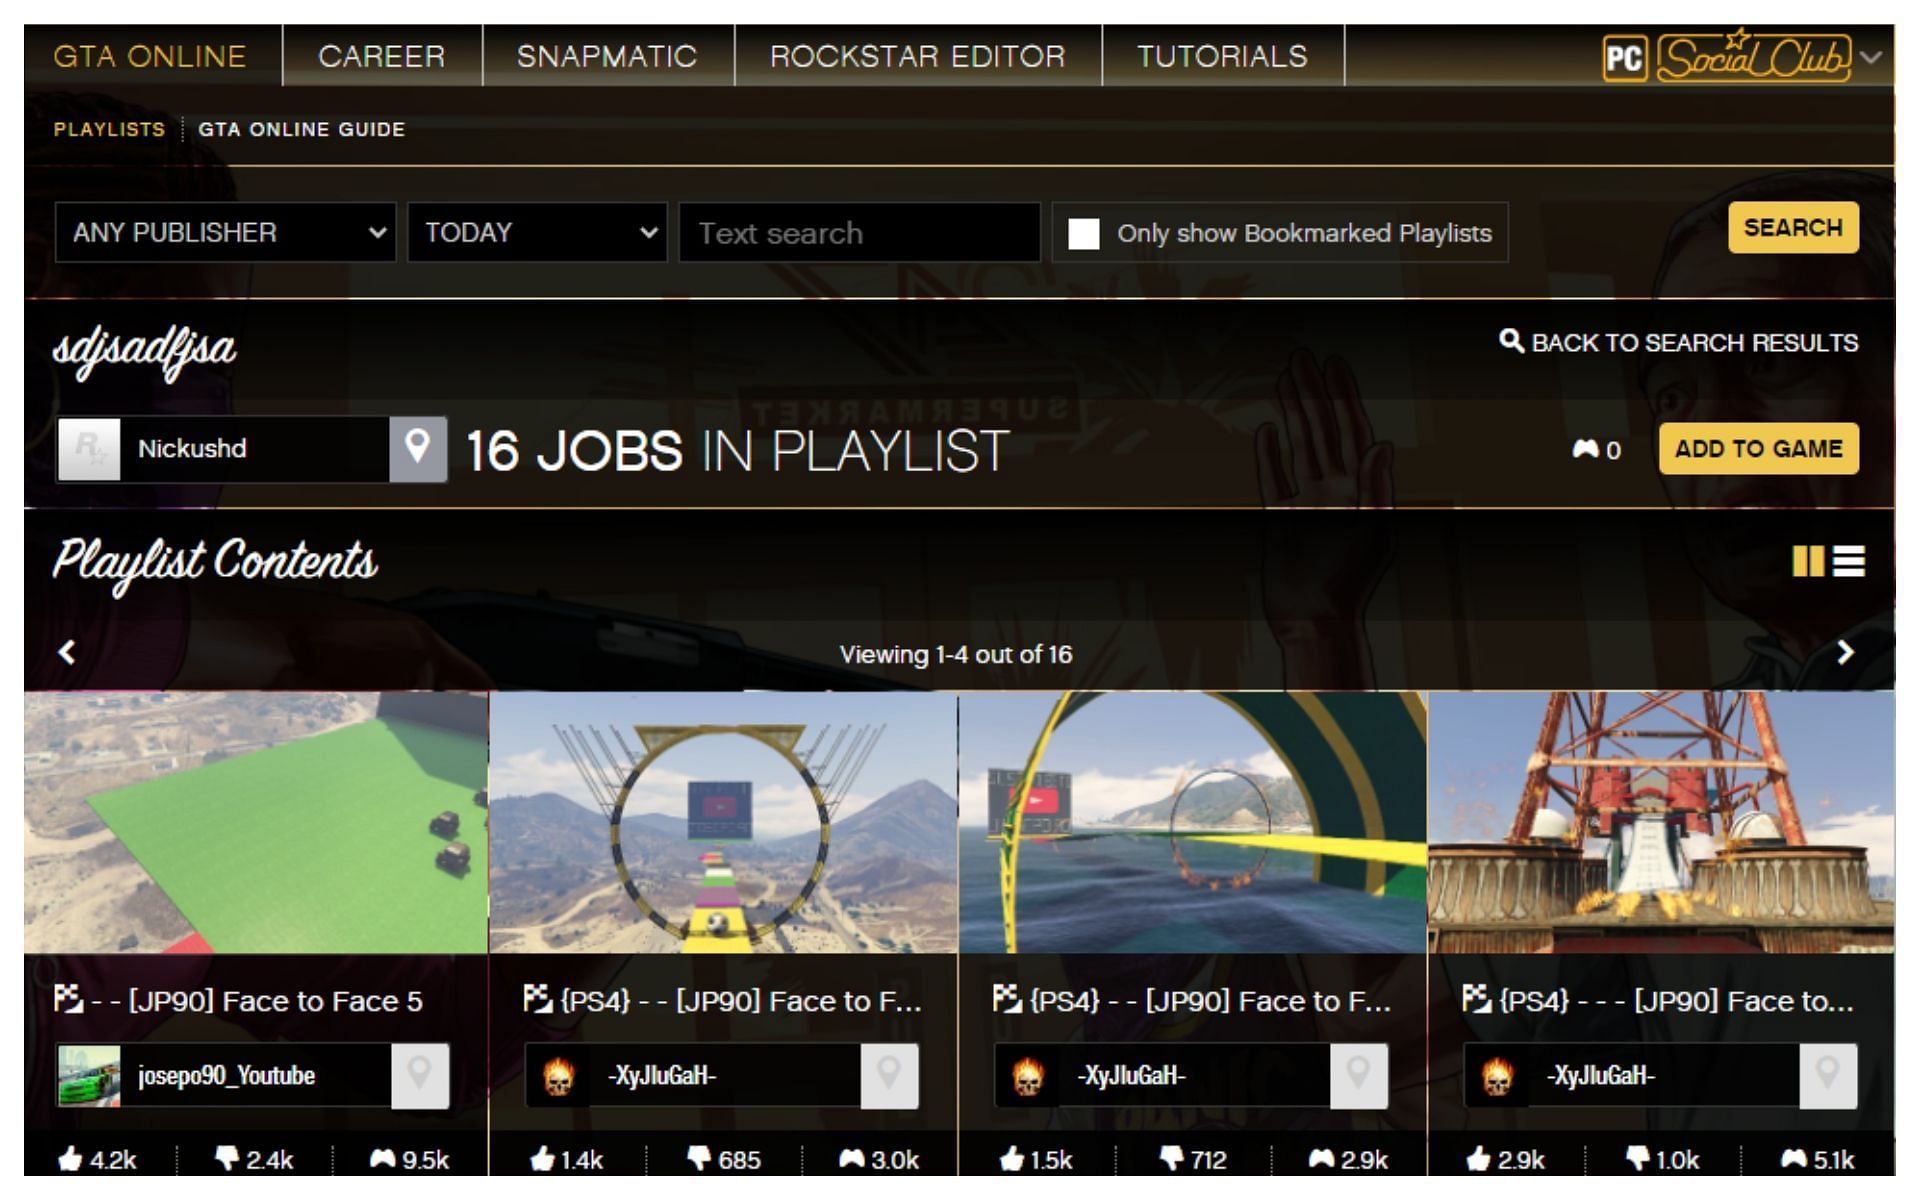 An impossible playlist name to search for, but worth trying (Image via Rockstar Games)